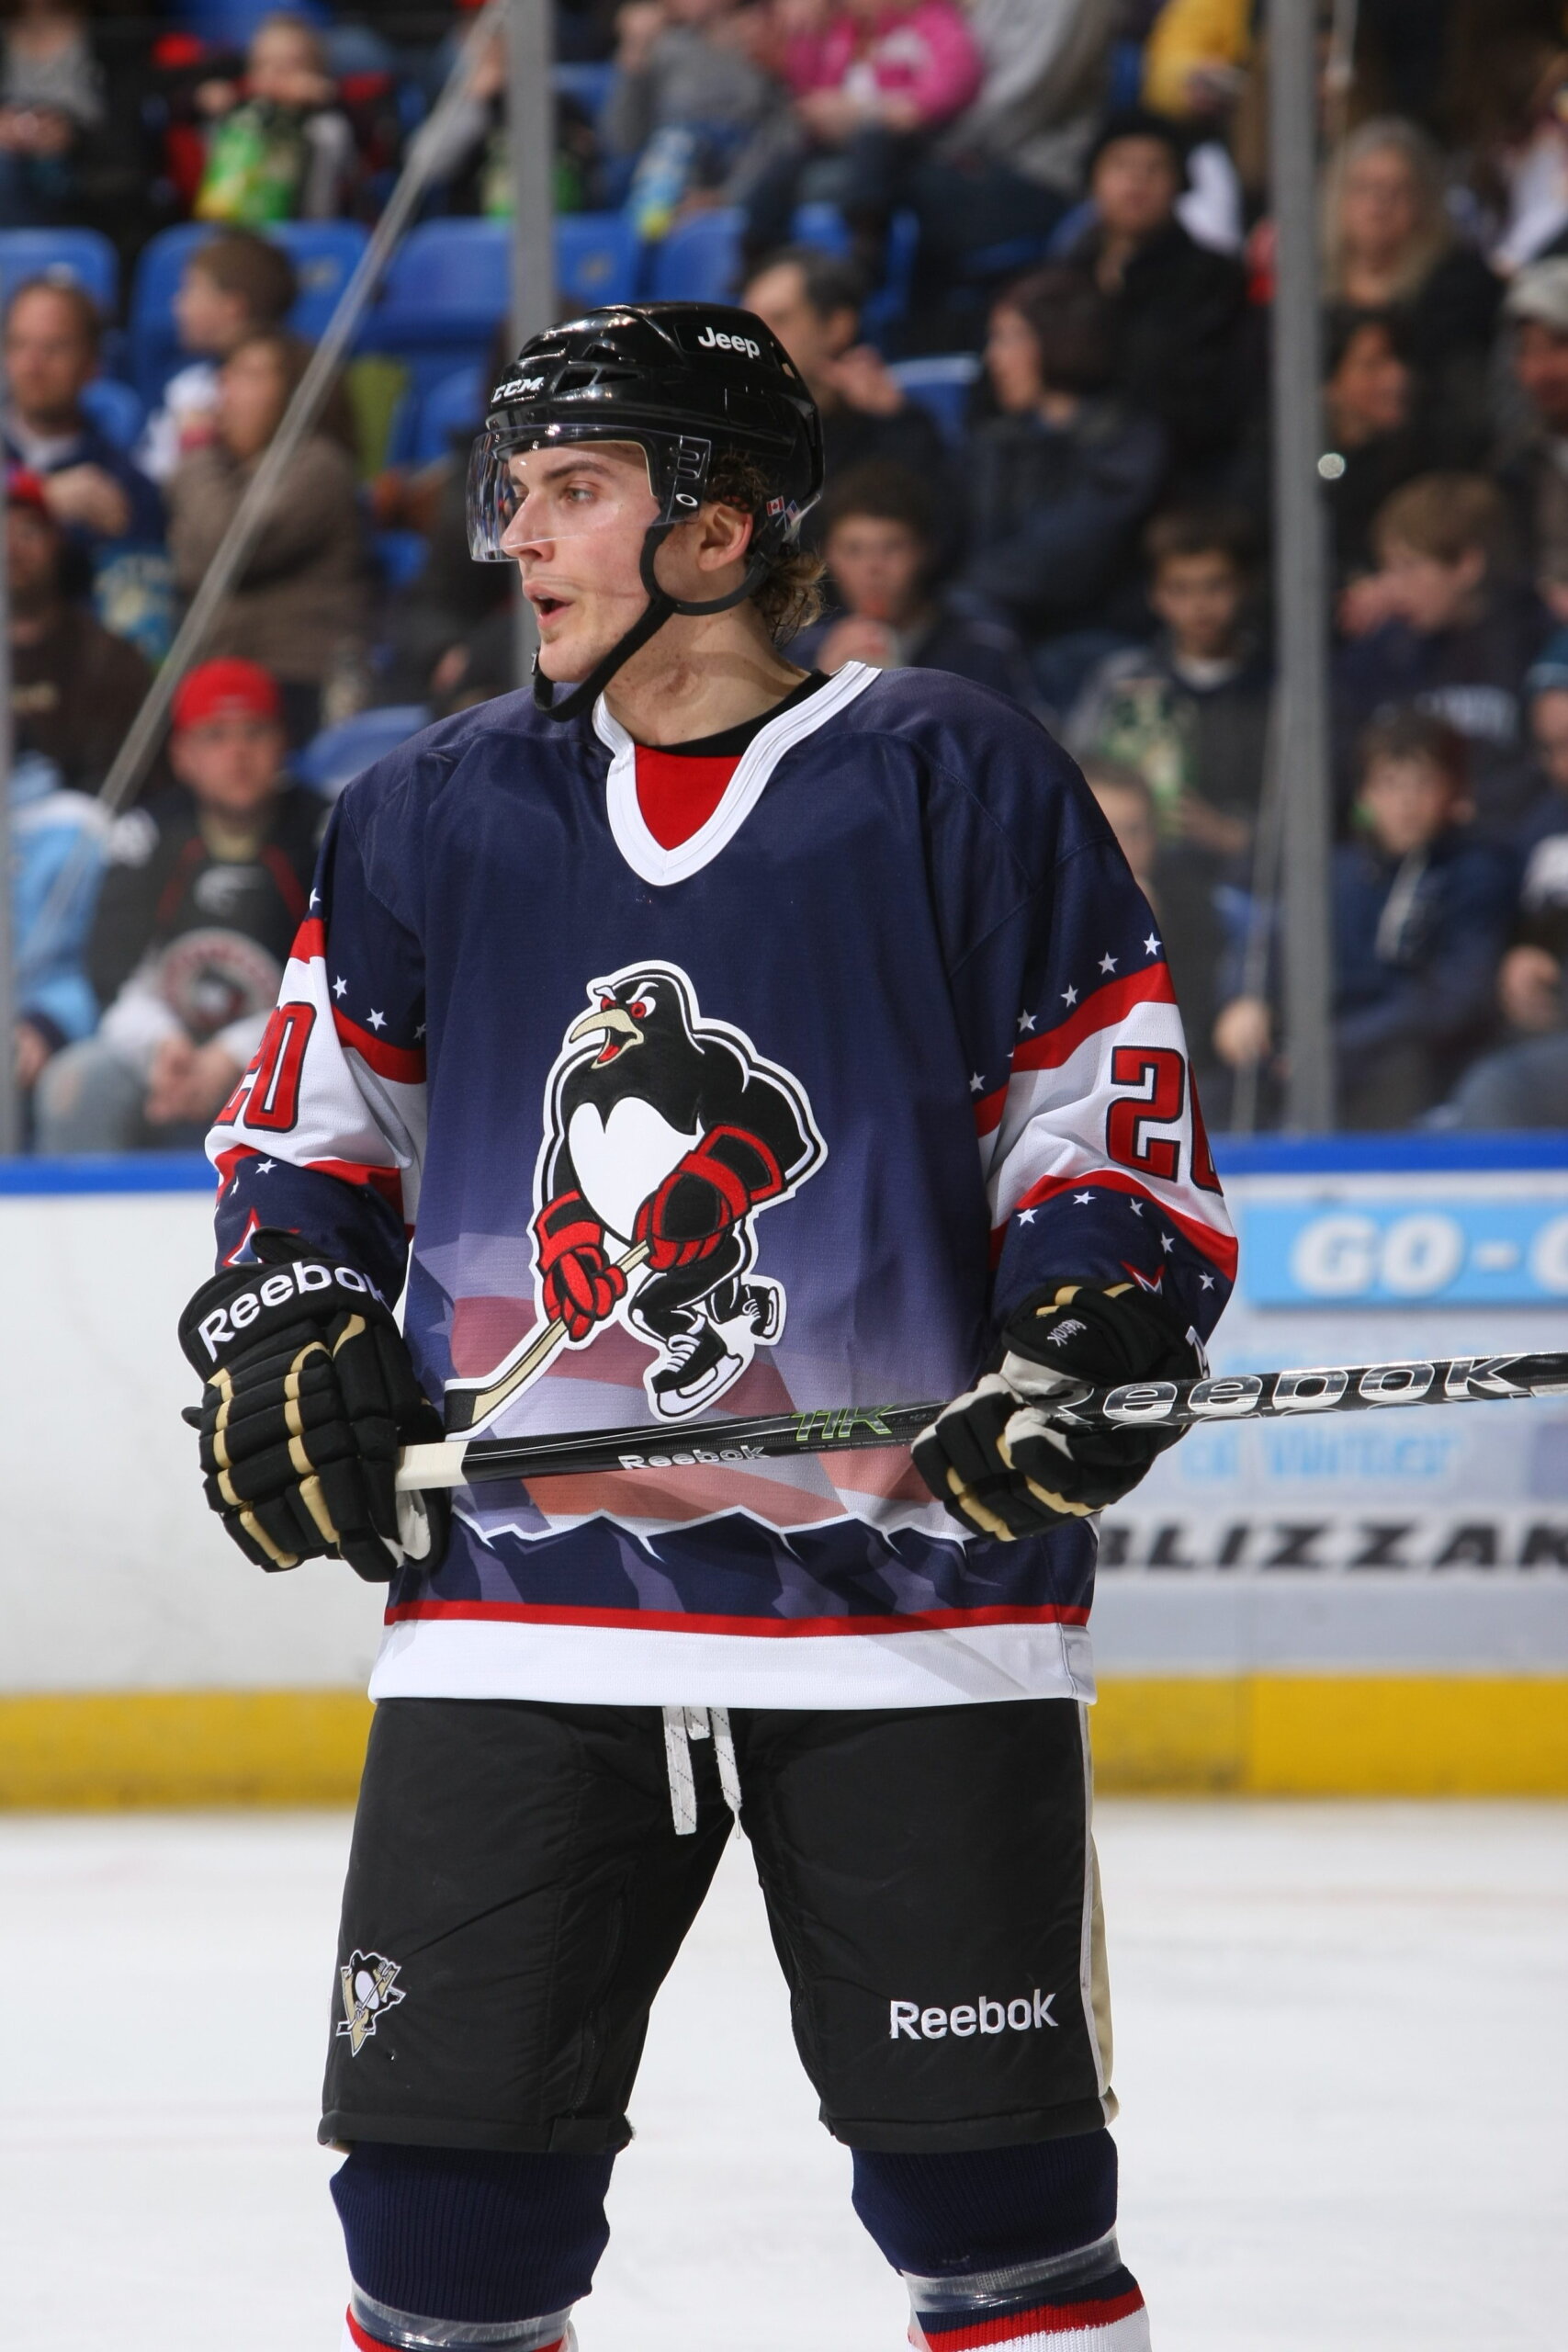 Military Jersey in Penguins